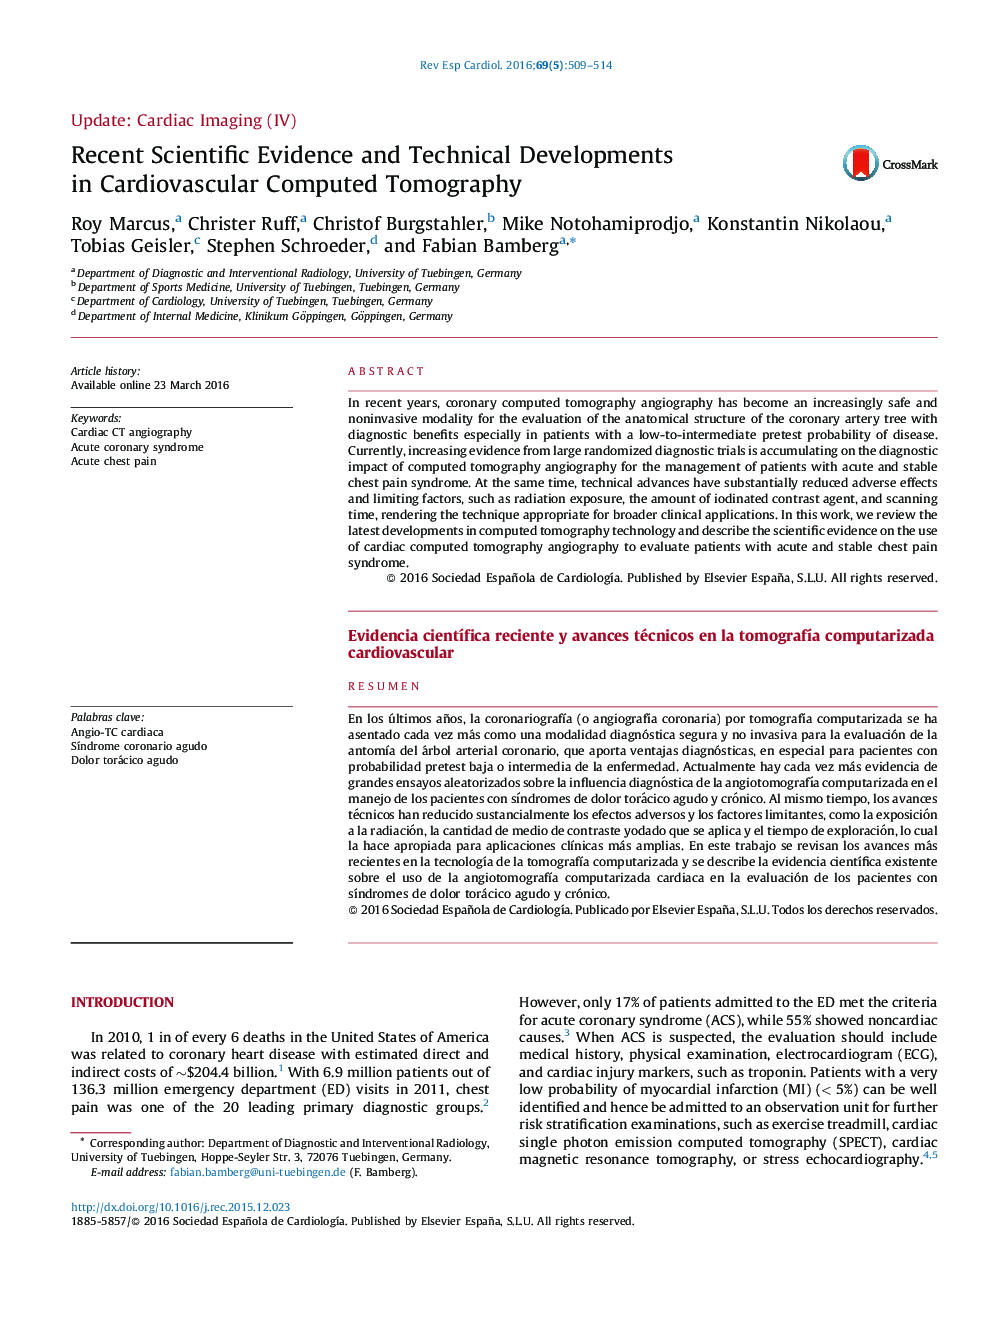 Recent Scientific Evidence and Technical Developments in Cardiovascular Computed Tomography